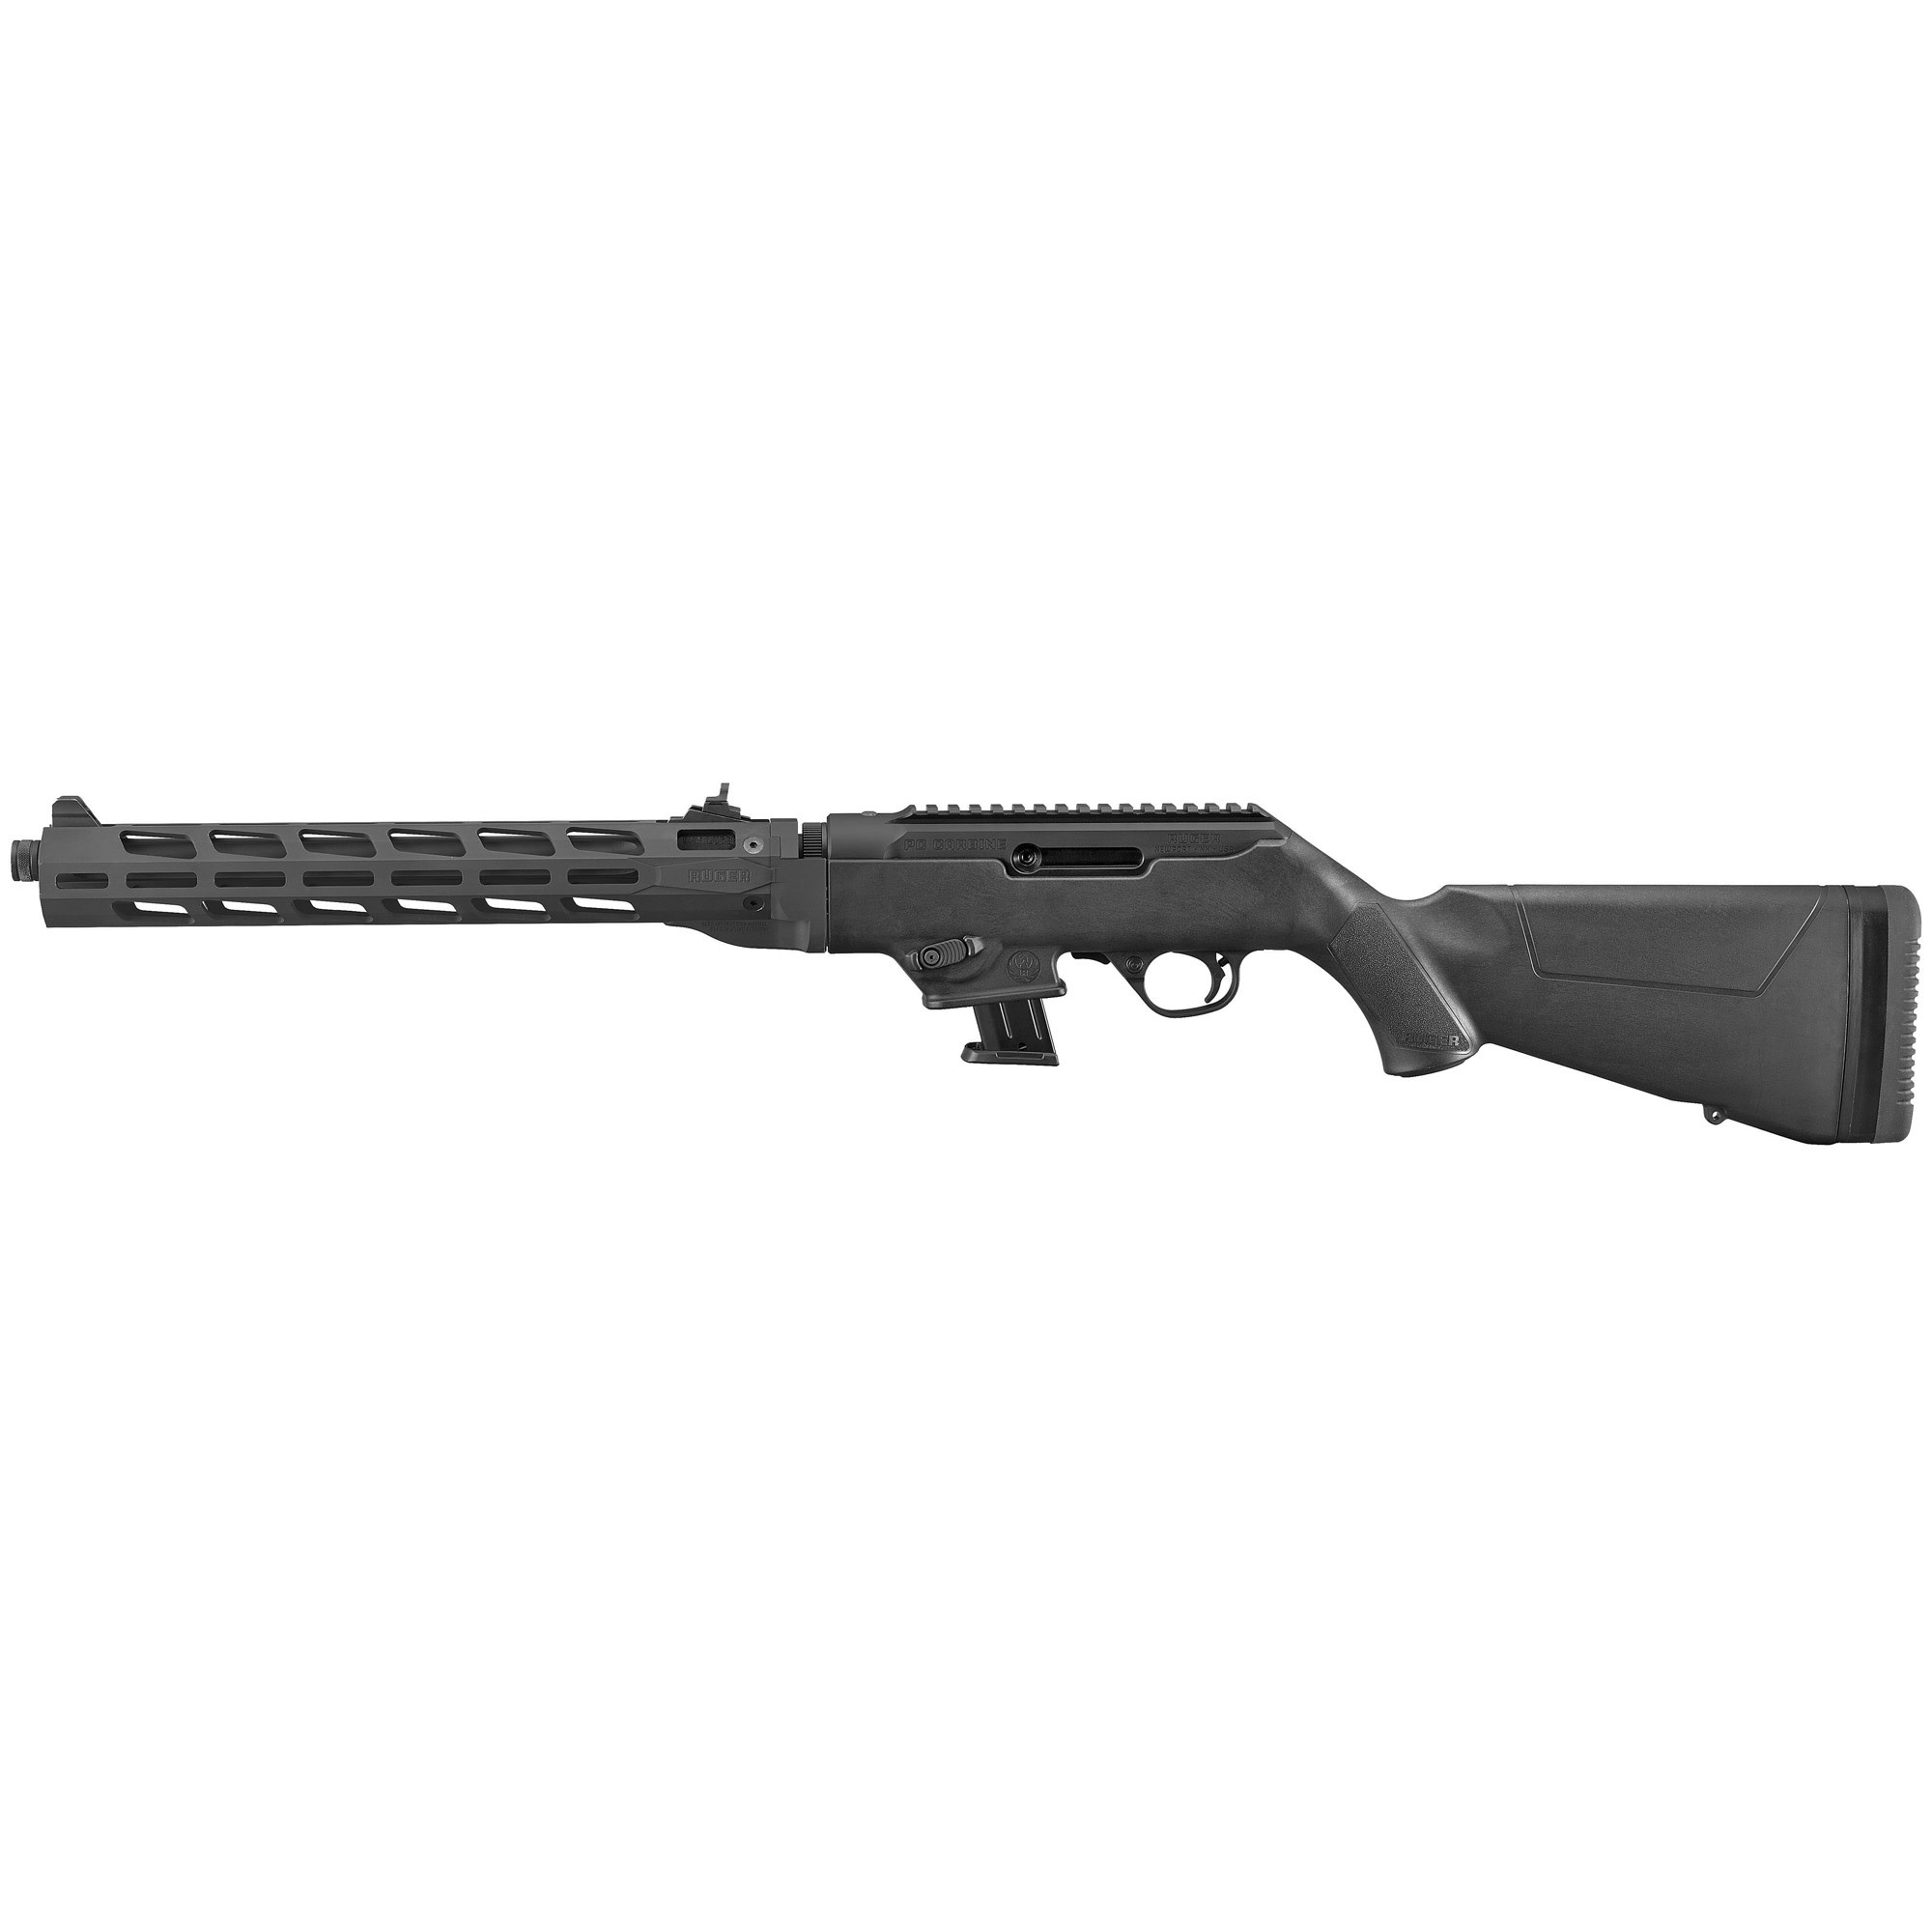 Ruger Pc Carbine 9mm 16 Free Float Hanguard Fluted And Threaded Barrel 1